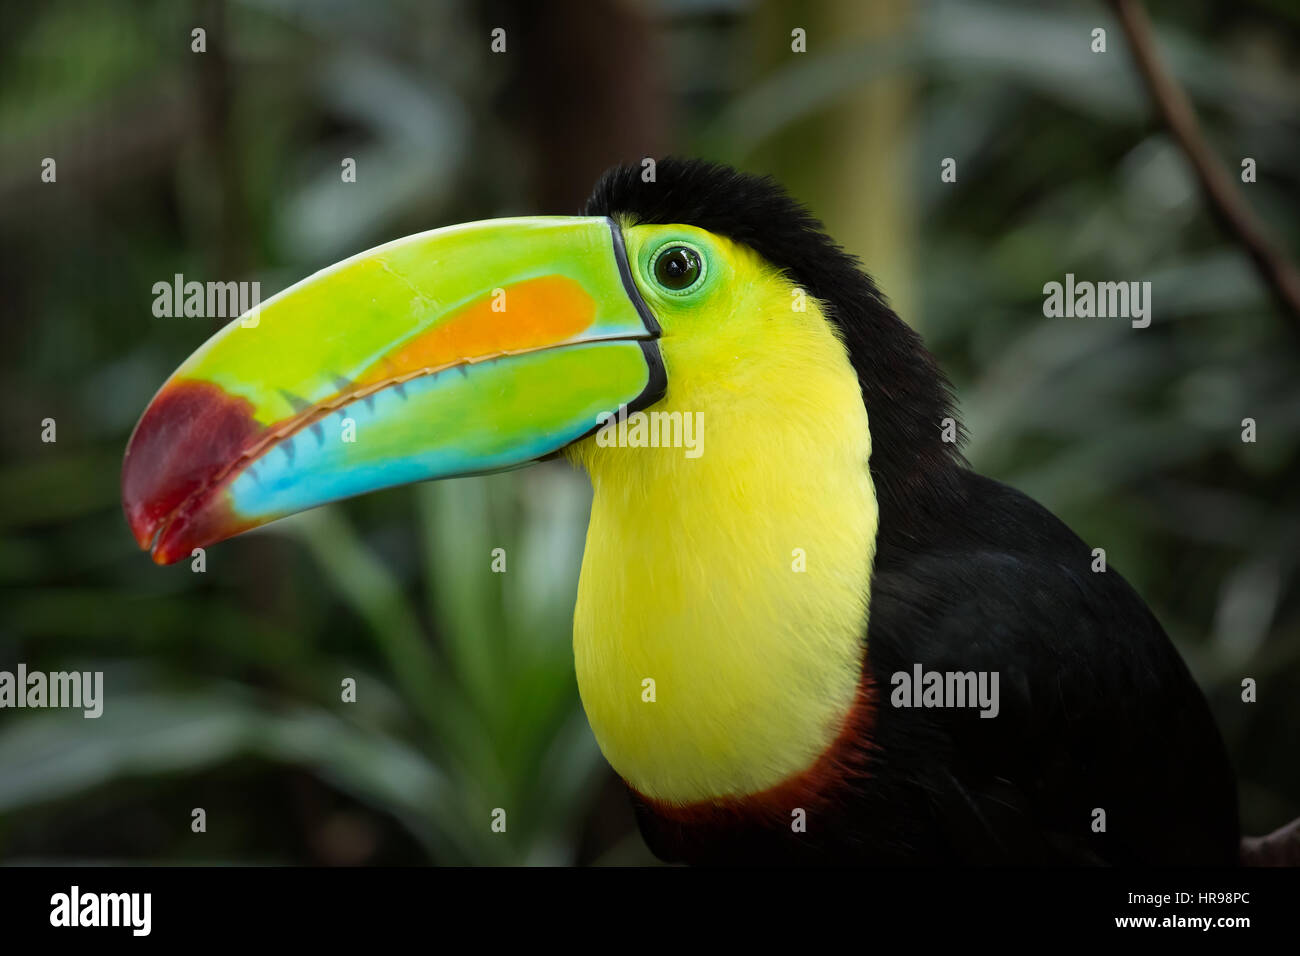 Head shot of a Keel-billed Toucan Stock Photo